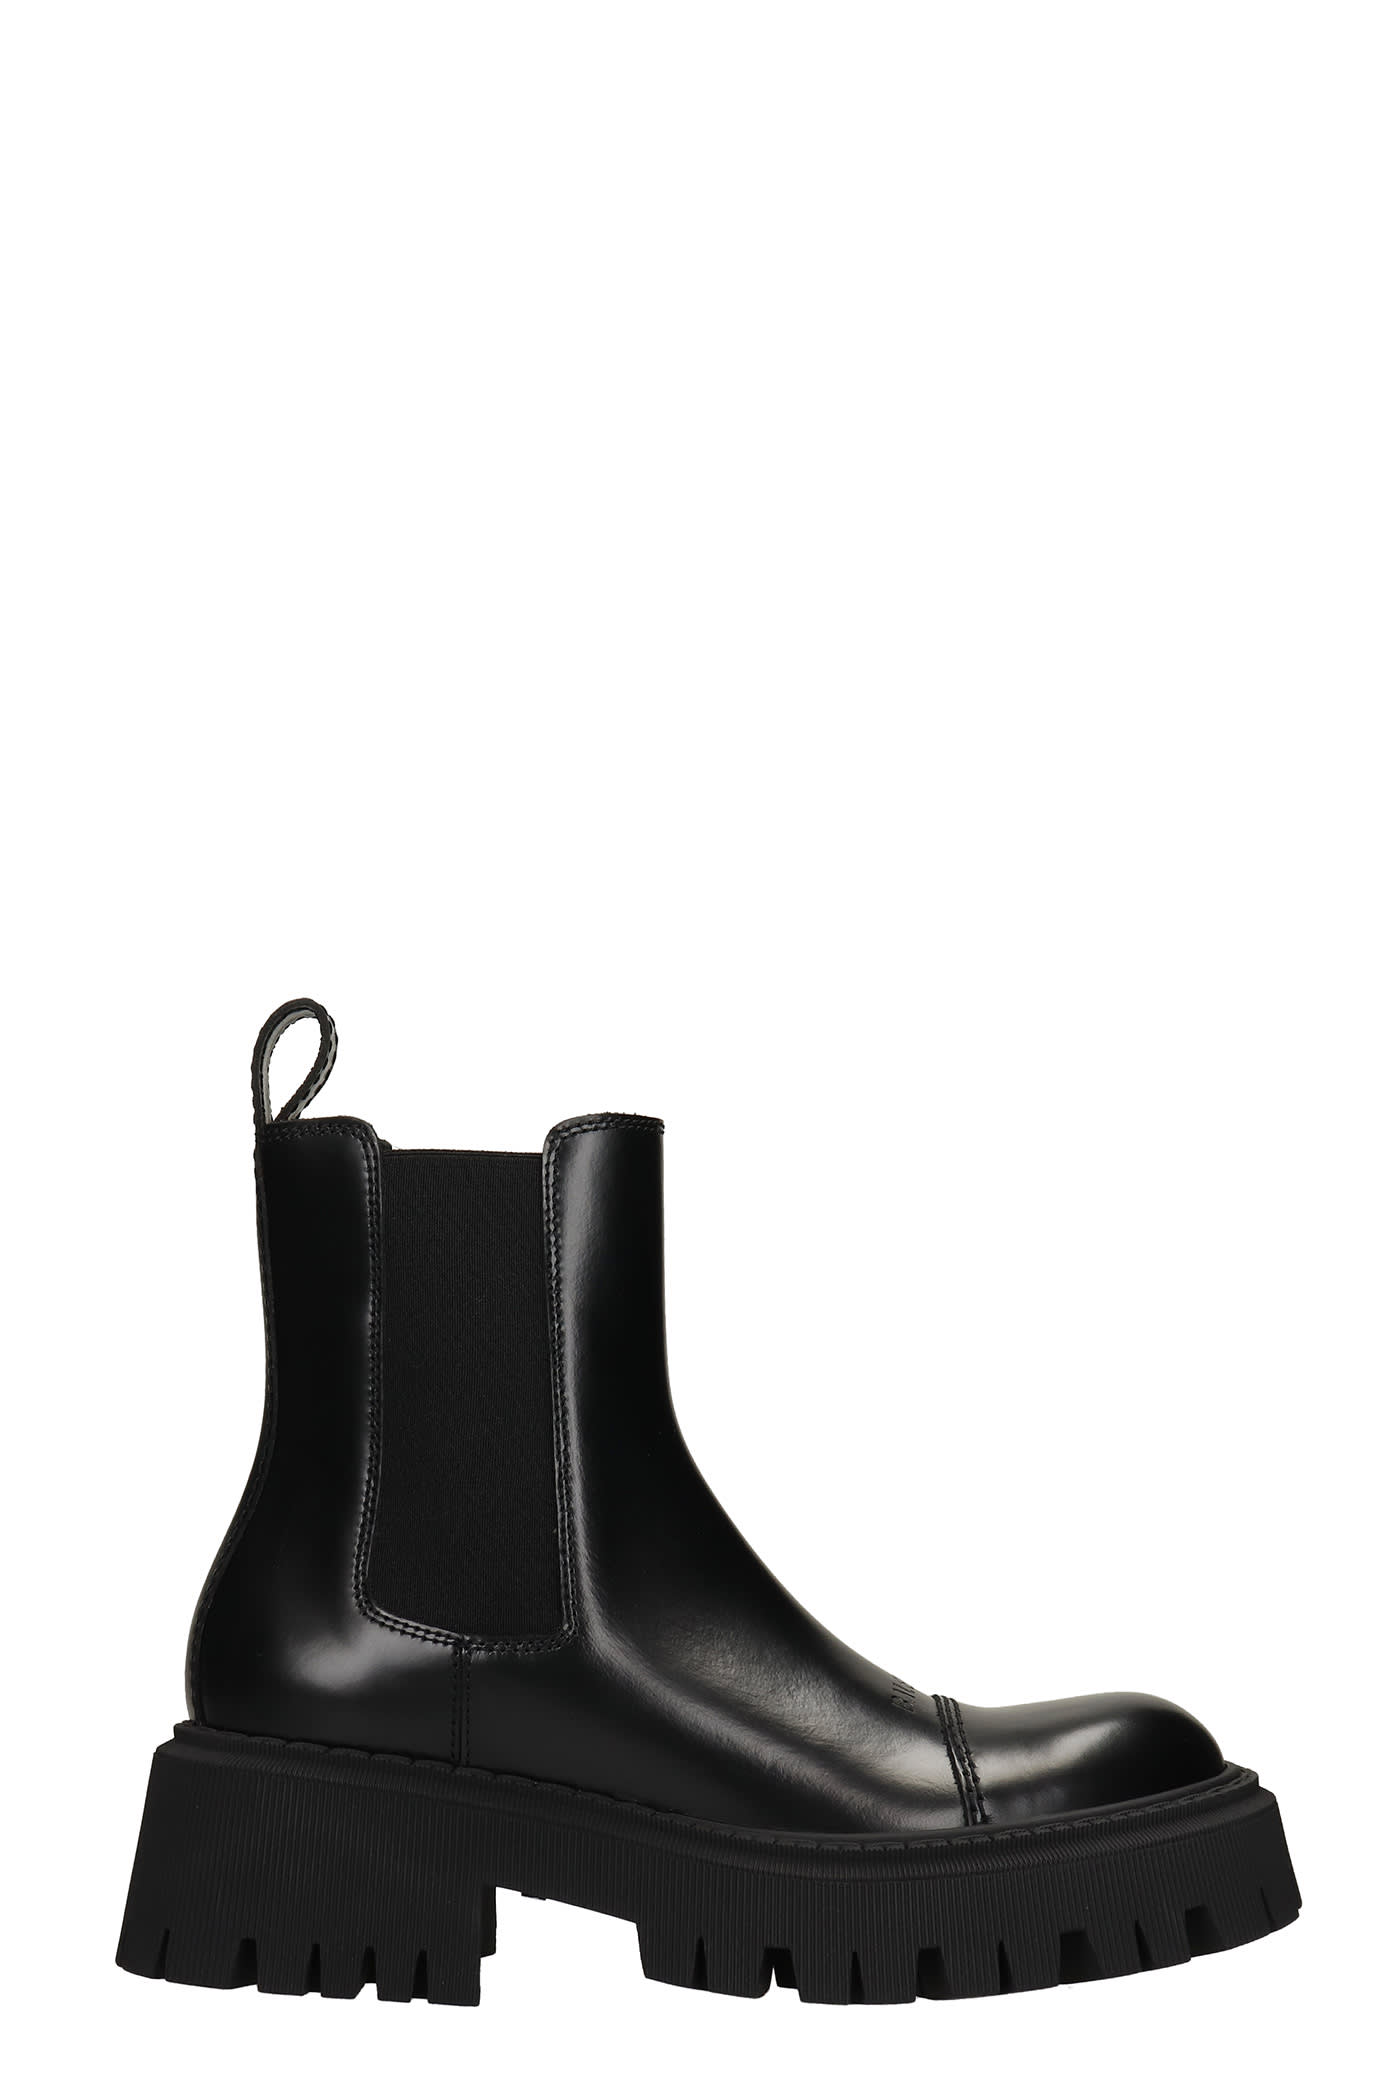 Balenciaga Tractor Ankle Boots In Black Leather